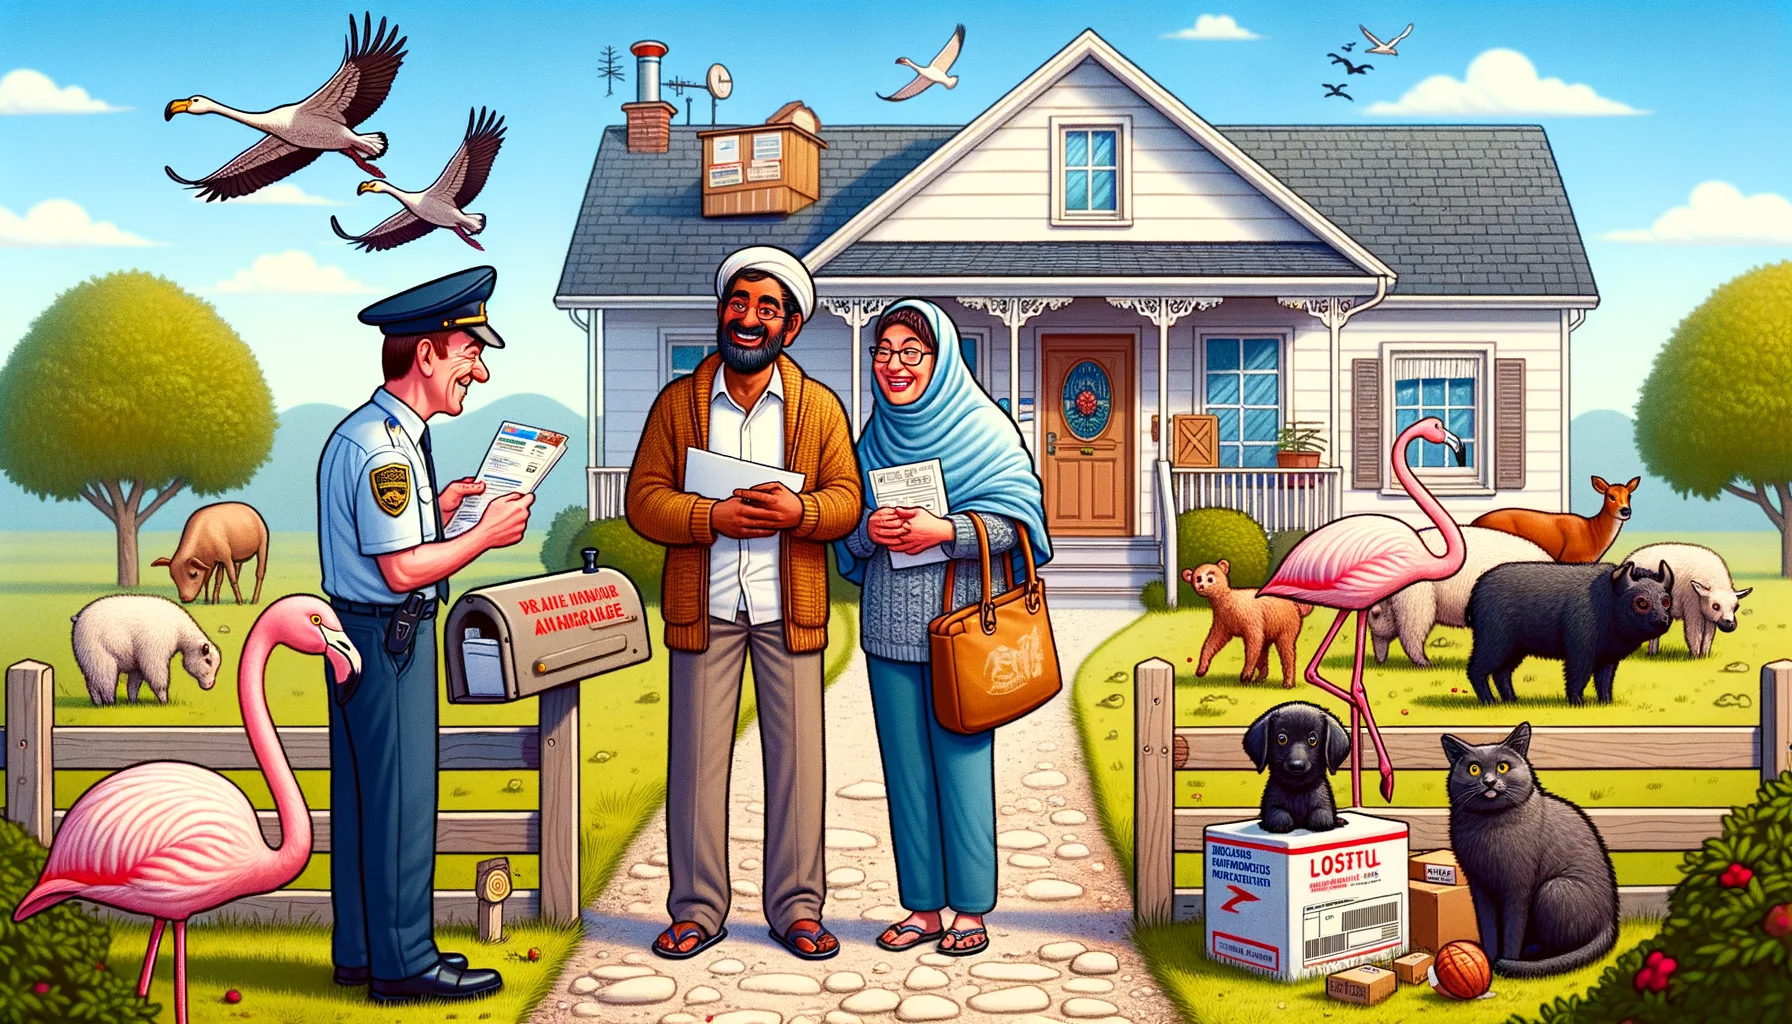 Imagine a witty and realistic scenario depicting the humorous aspects of buying a home in a rural area. Perhaps there's a Middle-Eastern couple inspecting a charming, rustic house with a Caucasian real estate agent, and instead of a car park, there's a barn filled with friendly farm animals. On the porch, a South Asian mailman struggles to deliver parcels to the wrong address. Meanwhile, a lost, whimsical flamingo from a nearby zoo casually strolls in the background. This whimsical yet everyday scenario captures the comical experiences and quirks of rural home-buying.